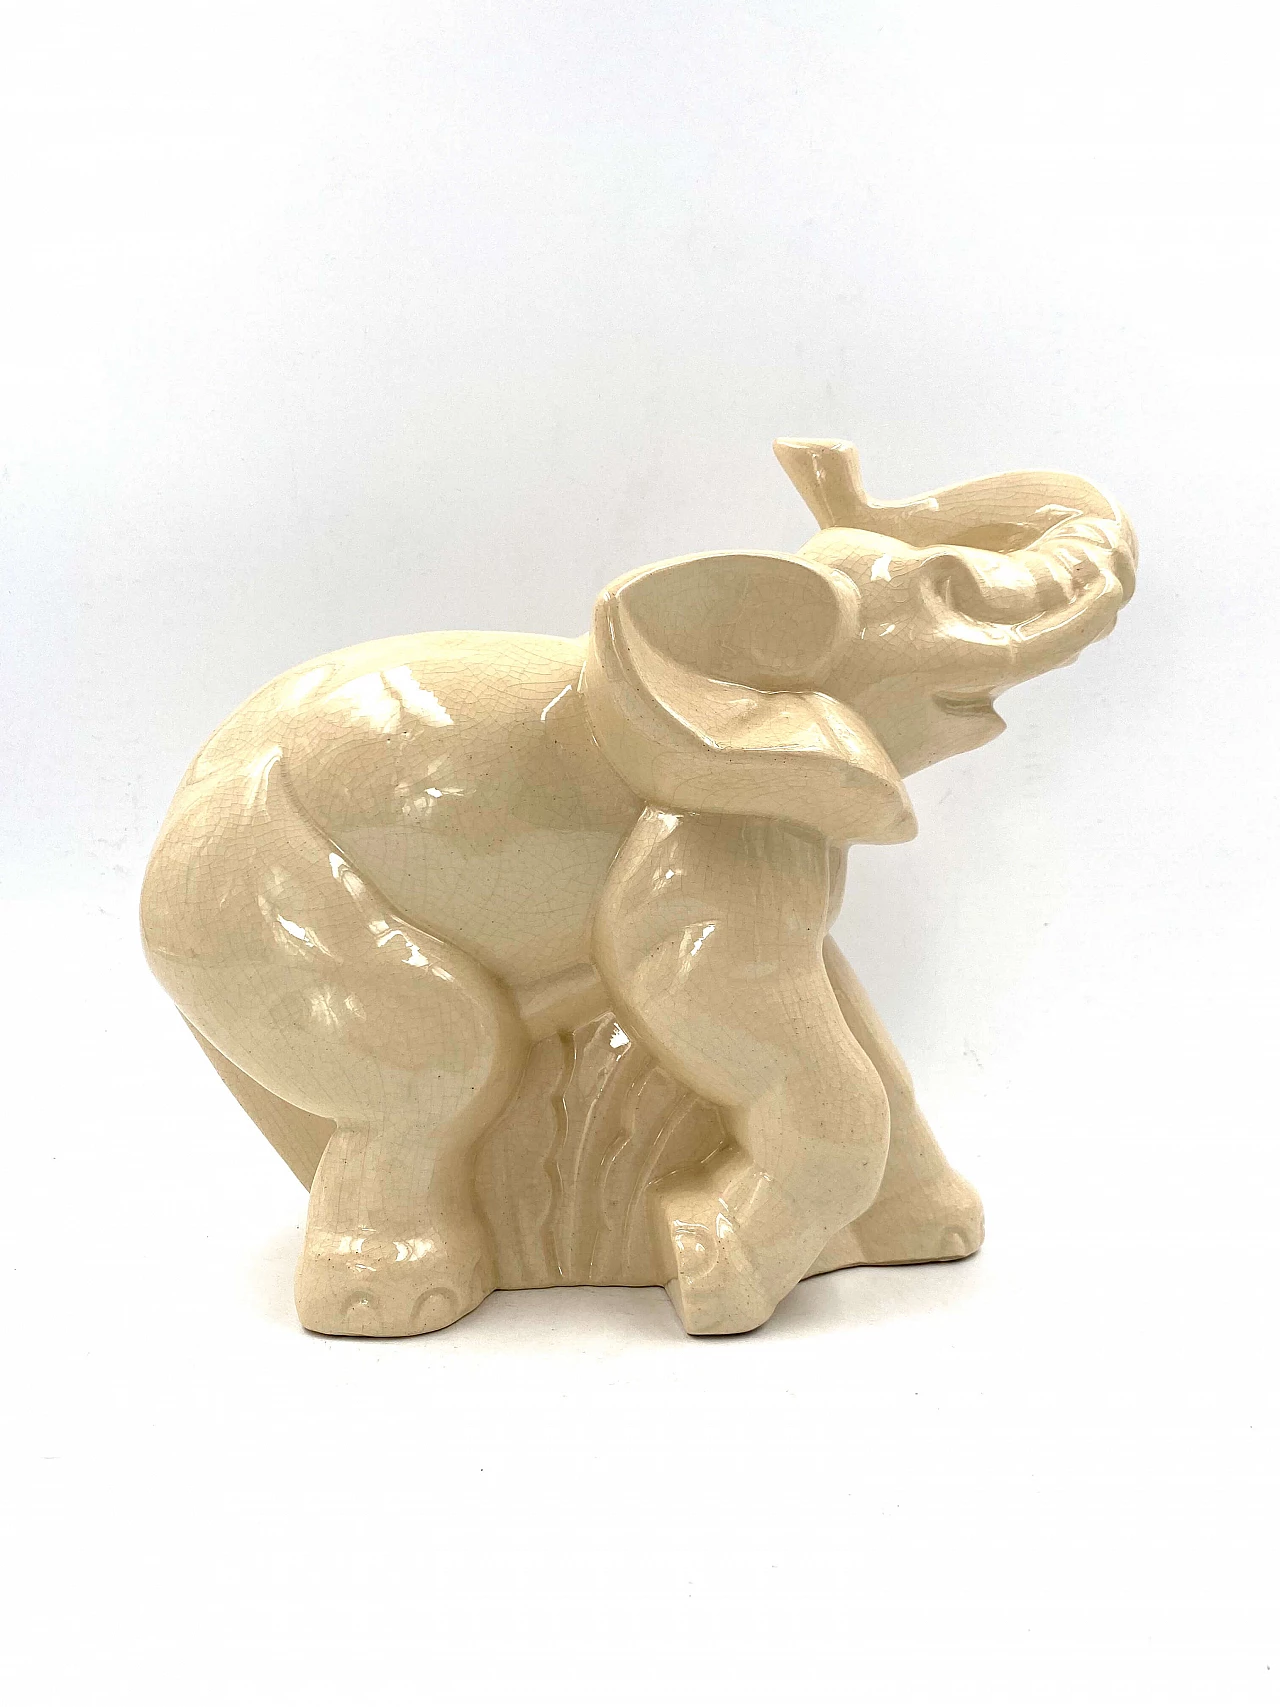 Sculpture of an elephant in craquelé glazed terracotta by Fontinelle, 1940s 1329672